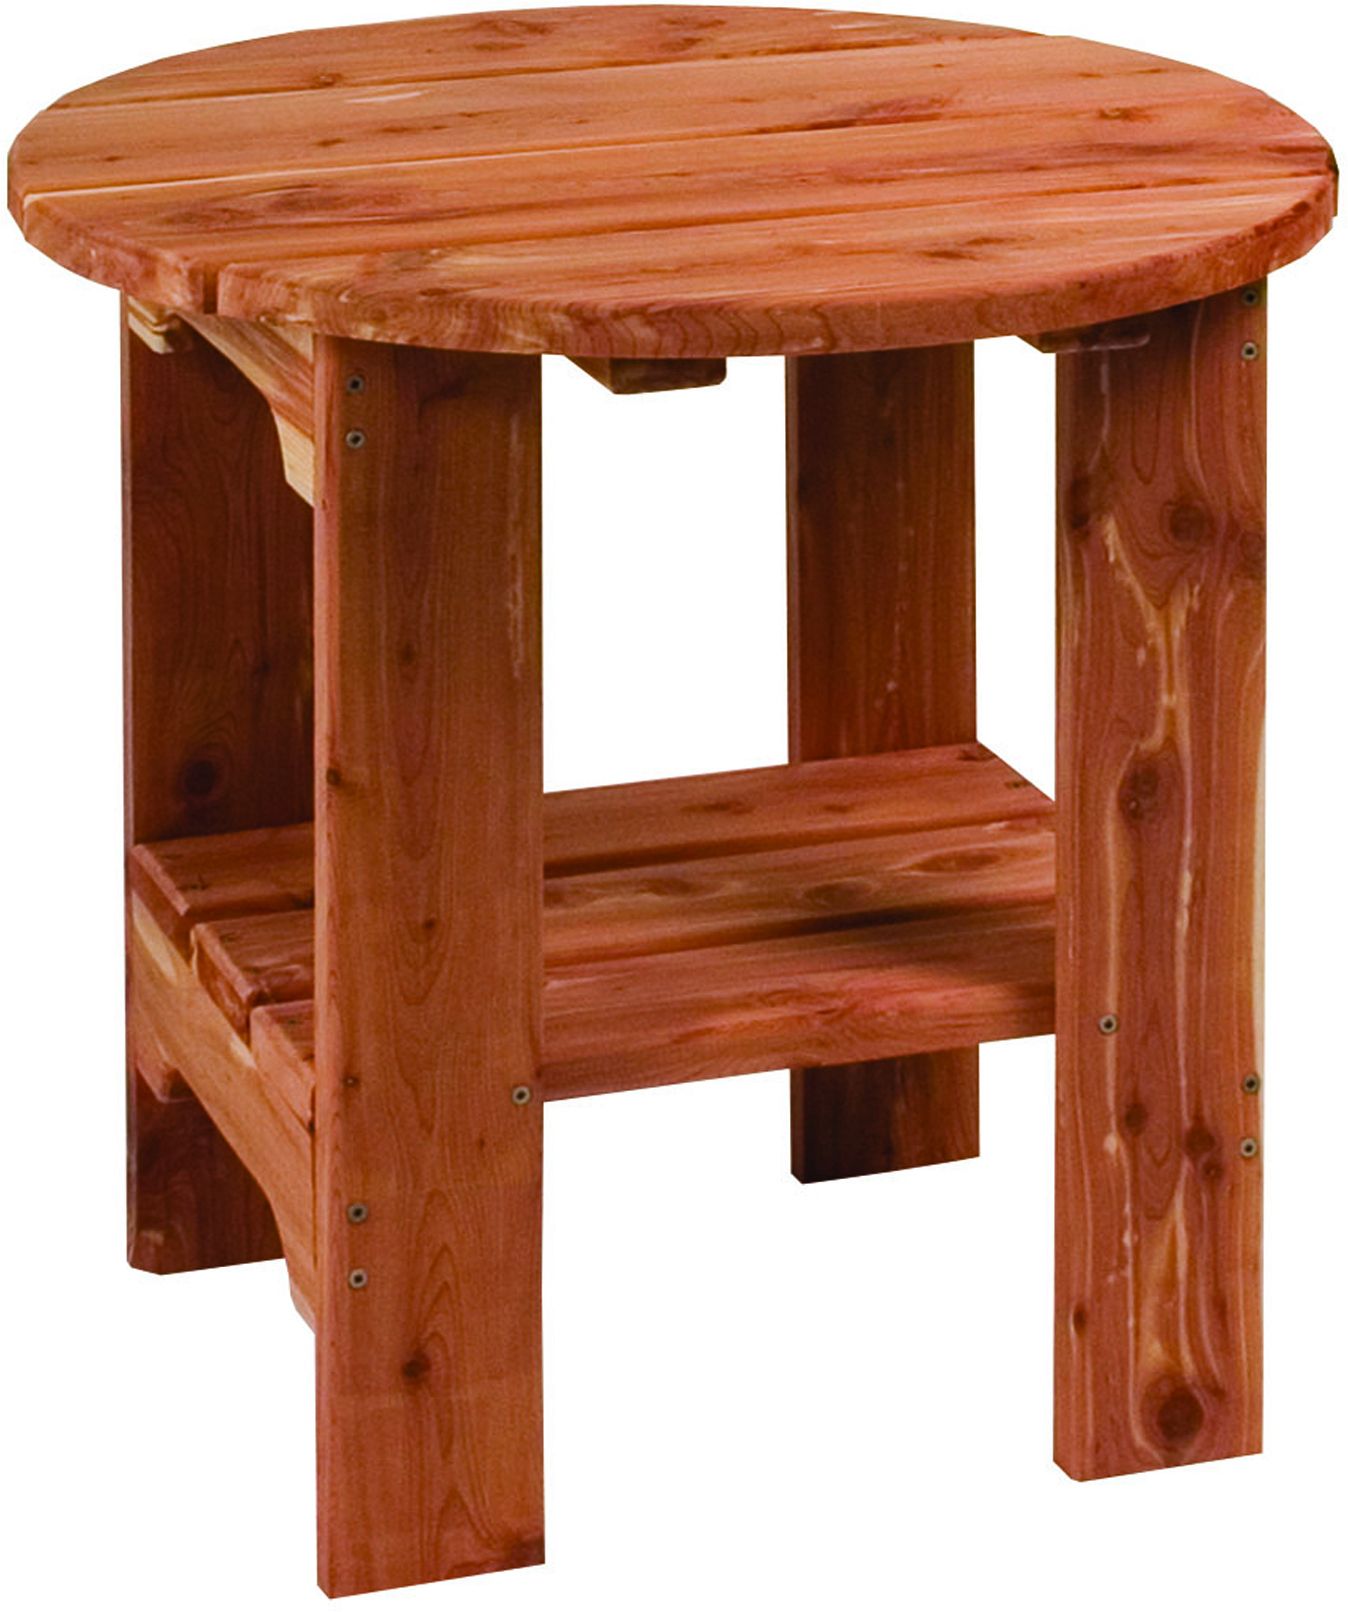 2019 Wood And Steel Outdoor Side Tables Throughout Round Cedar Side Table (View 6 of 15)